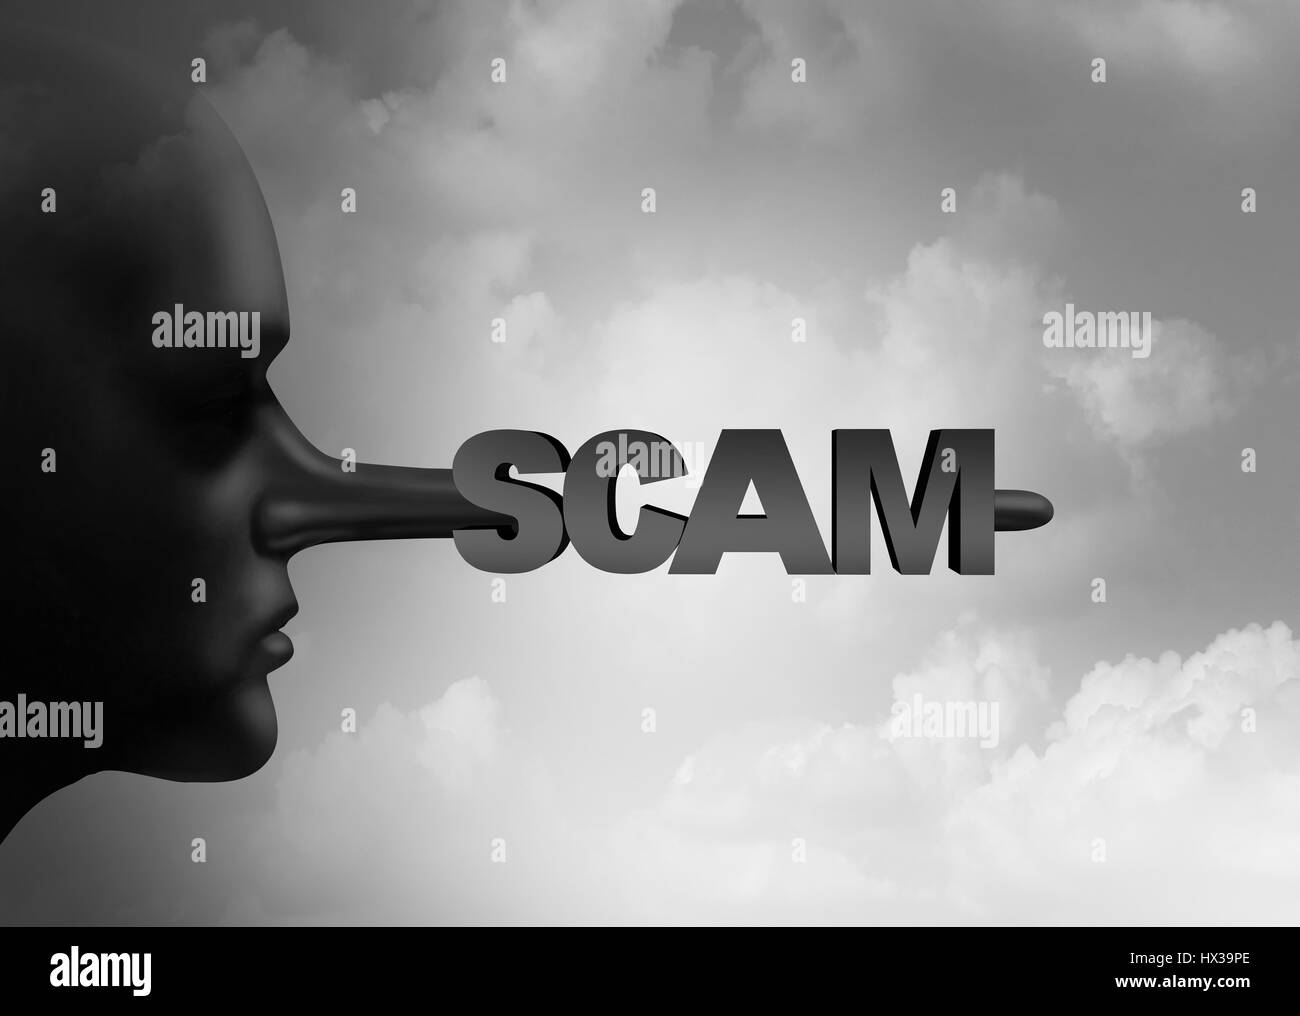 Scam concept as a scamming person with a liar pinocchio long nose with text as a symbol for criminal dishonesty with 3D illustration elements. Stock Photo